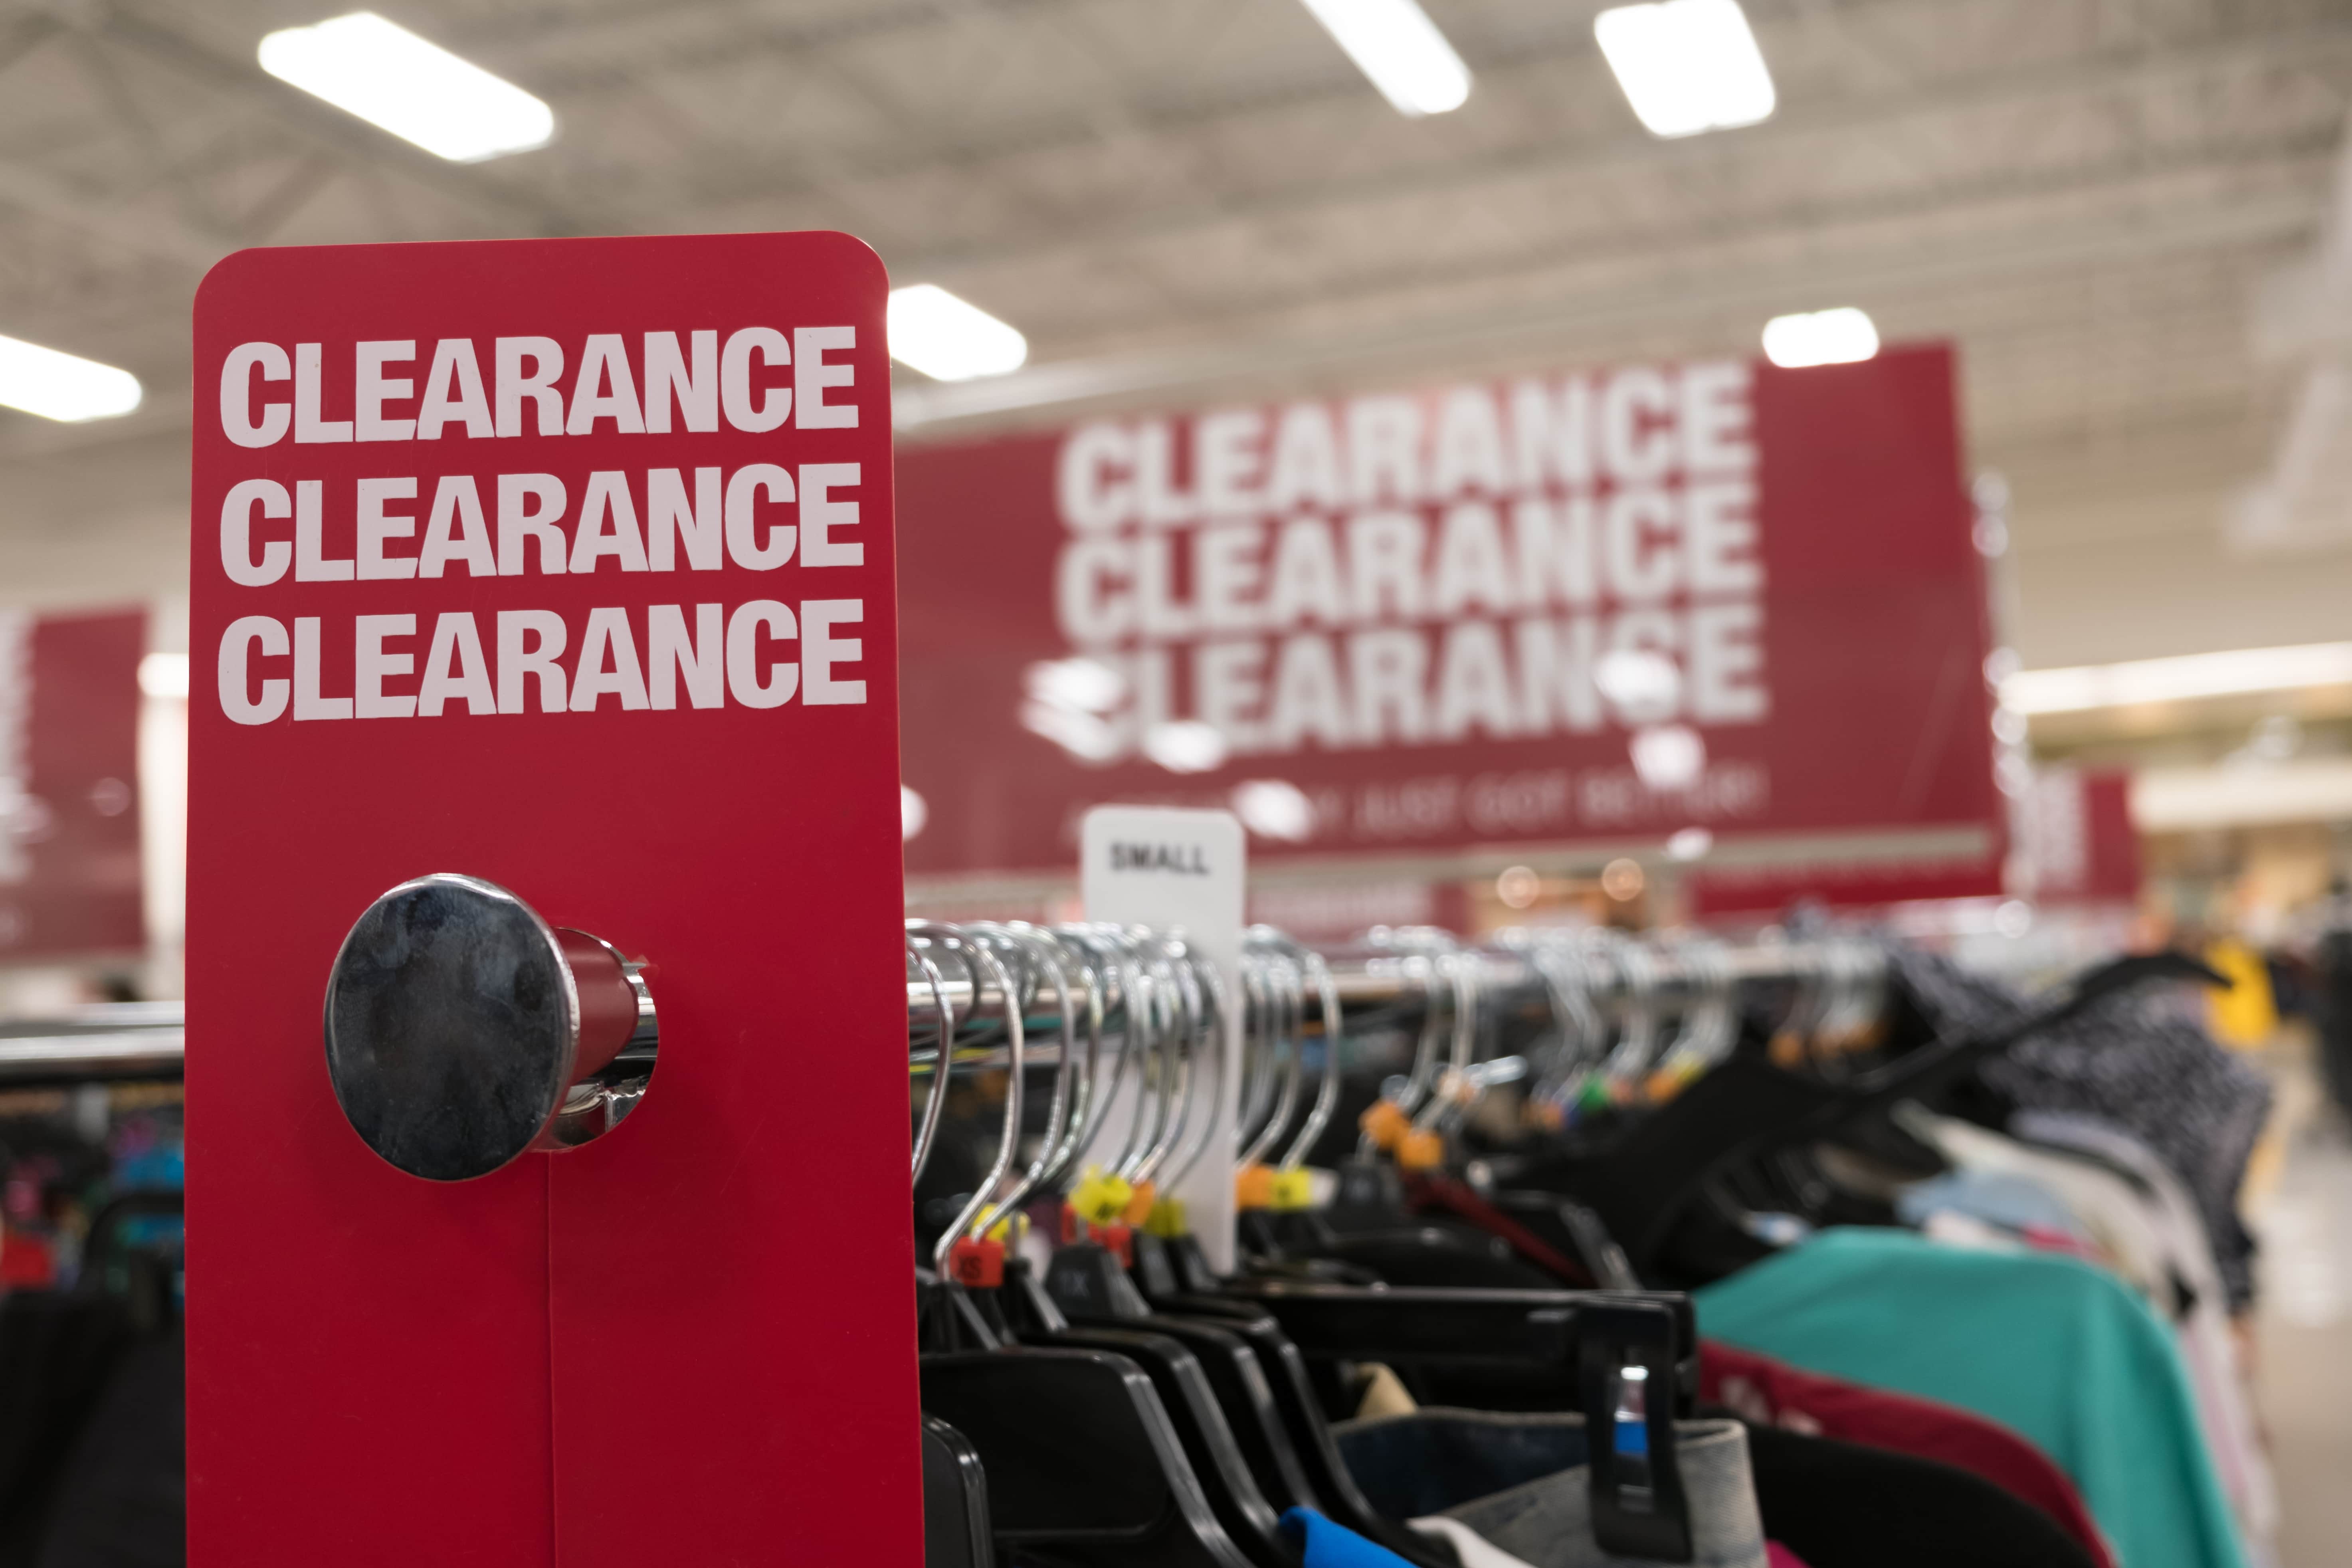 Photo of a clearance sign in a store